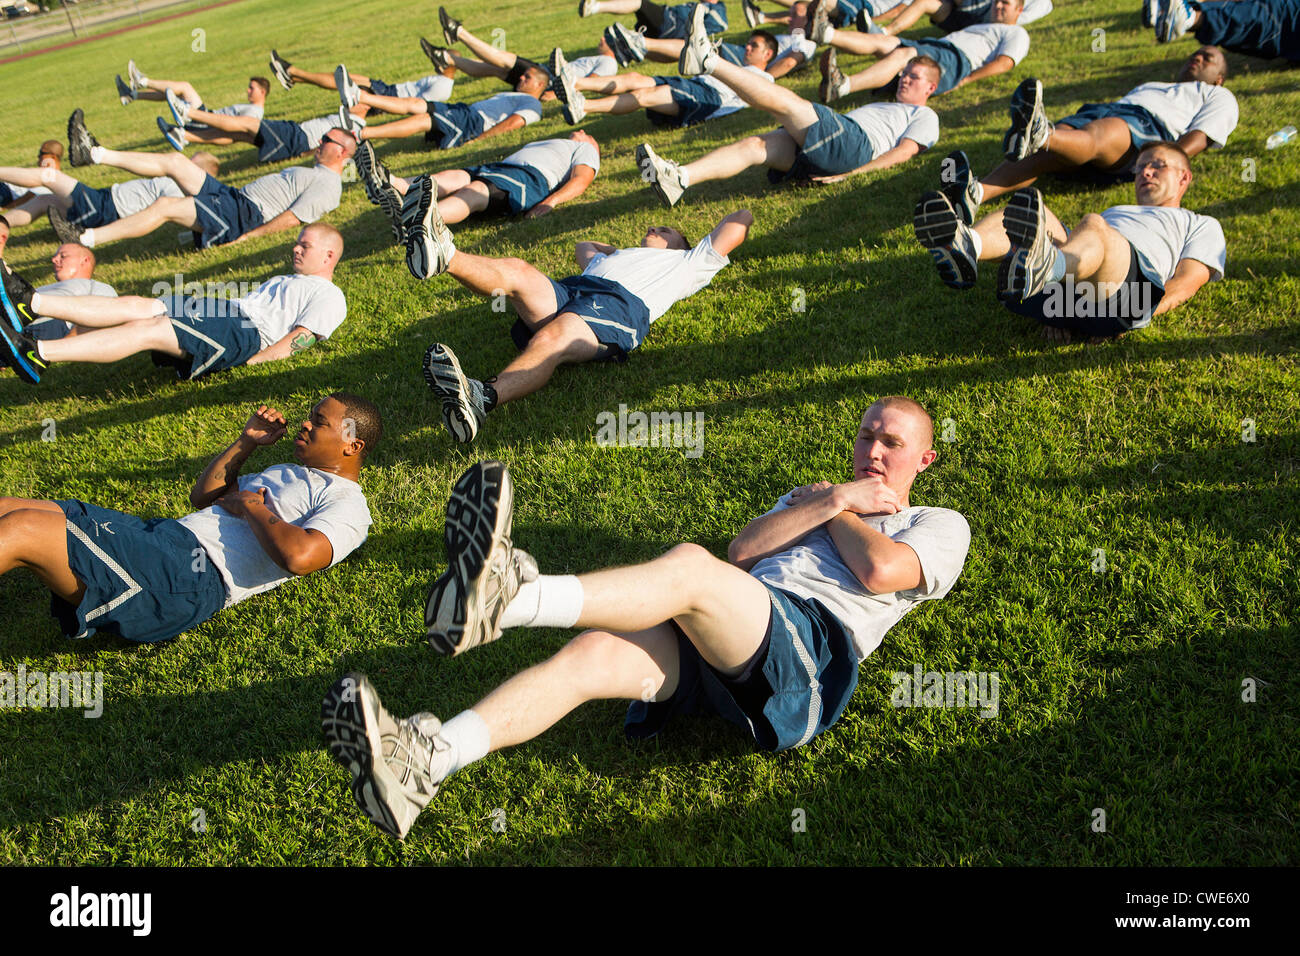 Air Force personnel participate in morning physical training at Davis-Monthan Air Force Base. Stock Photo